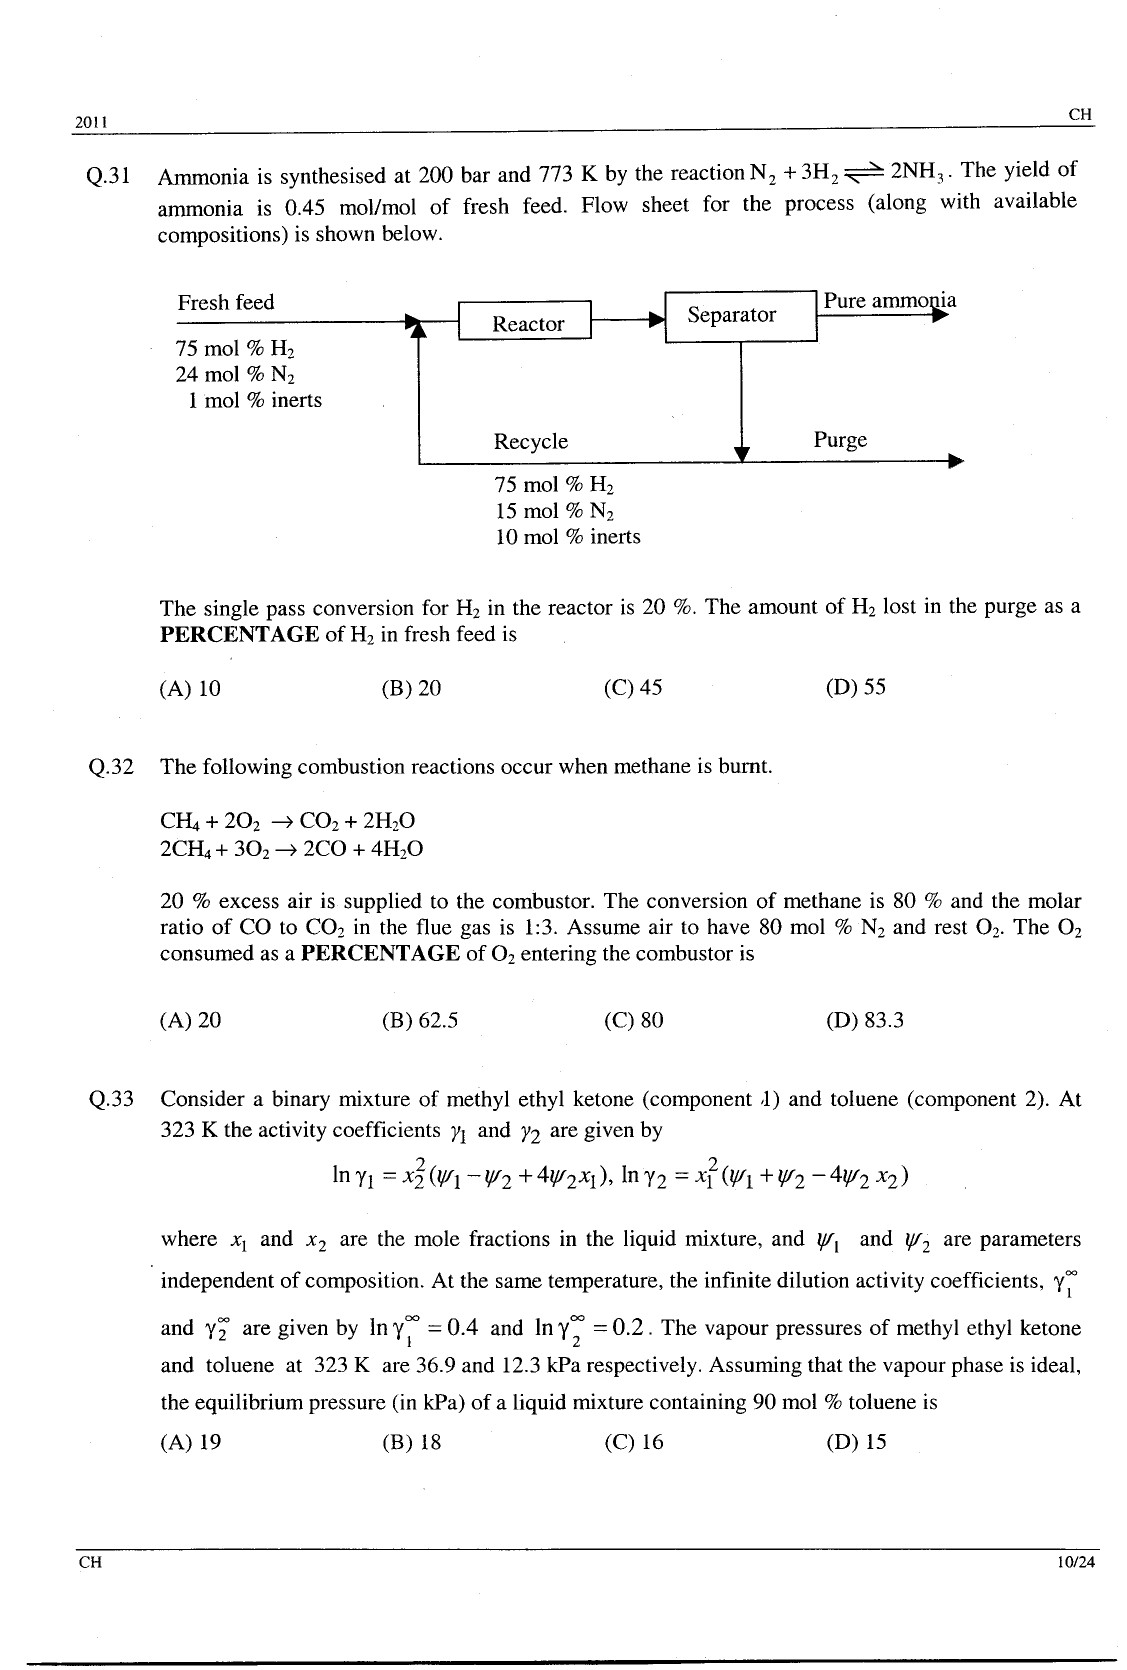 GATE Exam Question Paper 2011 Chemical Engineering 10